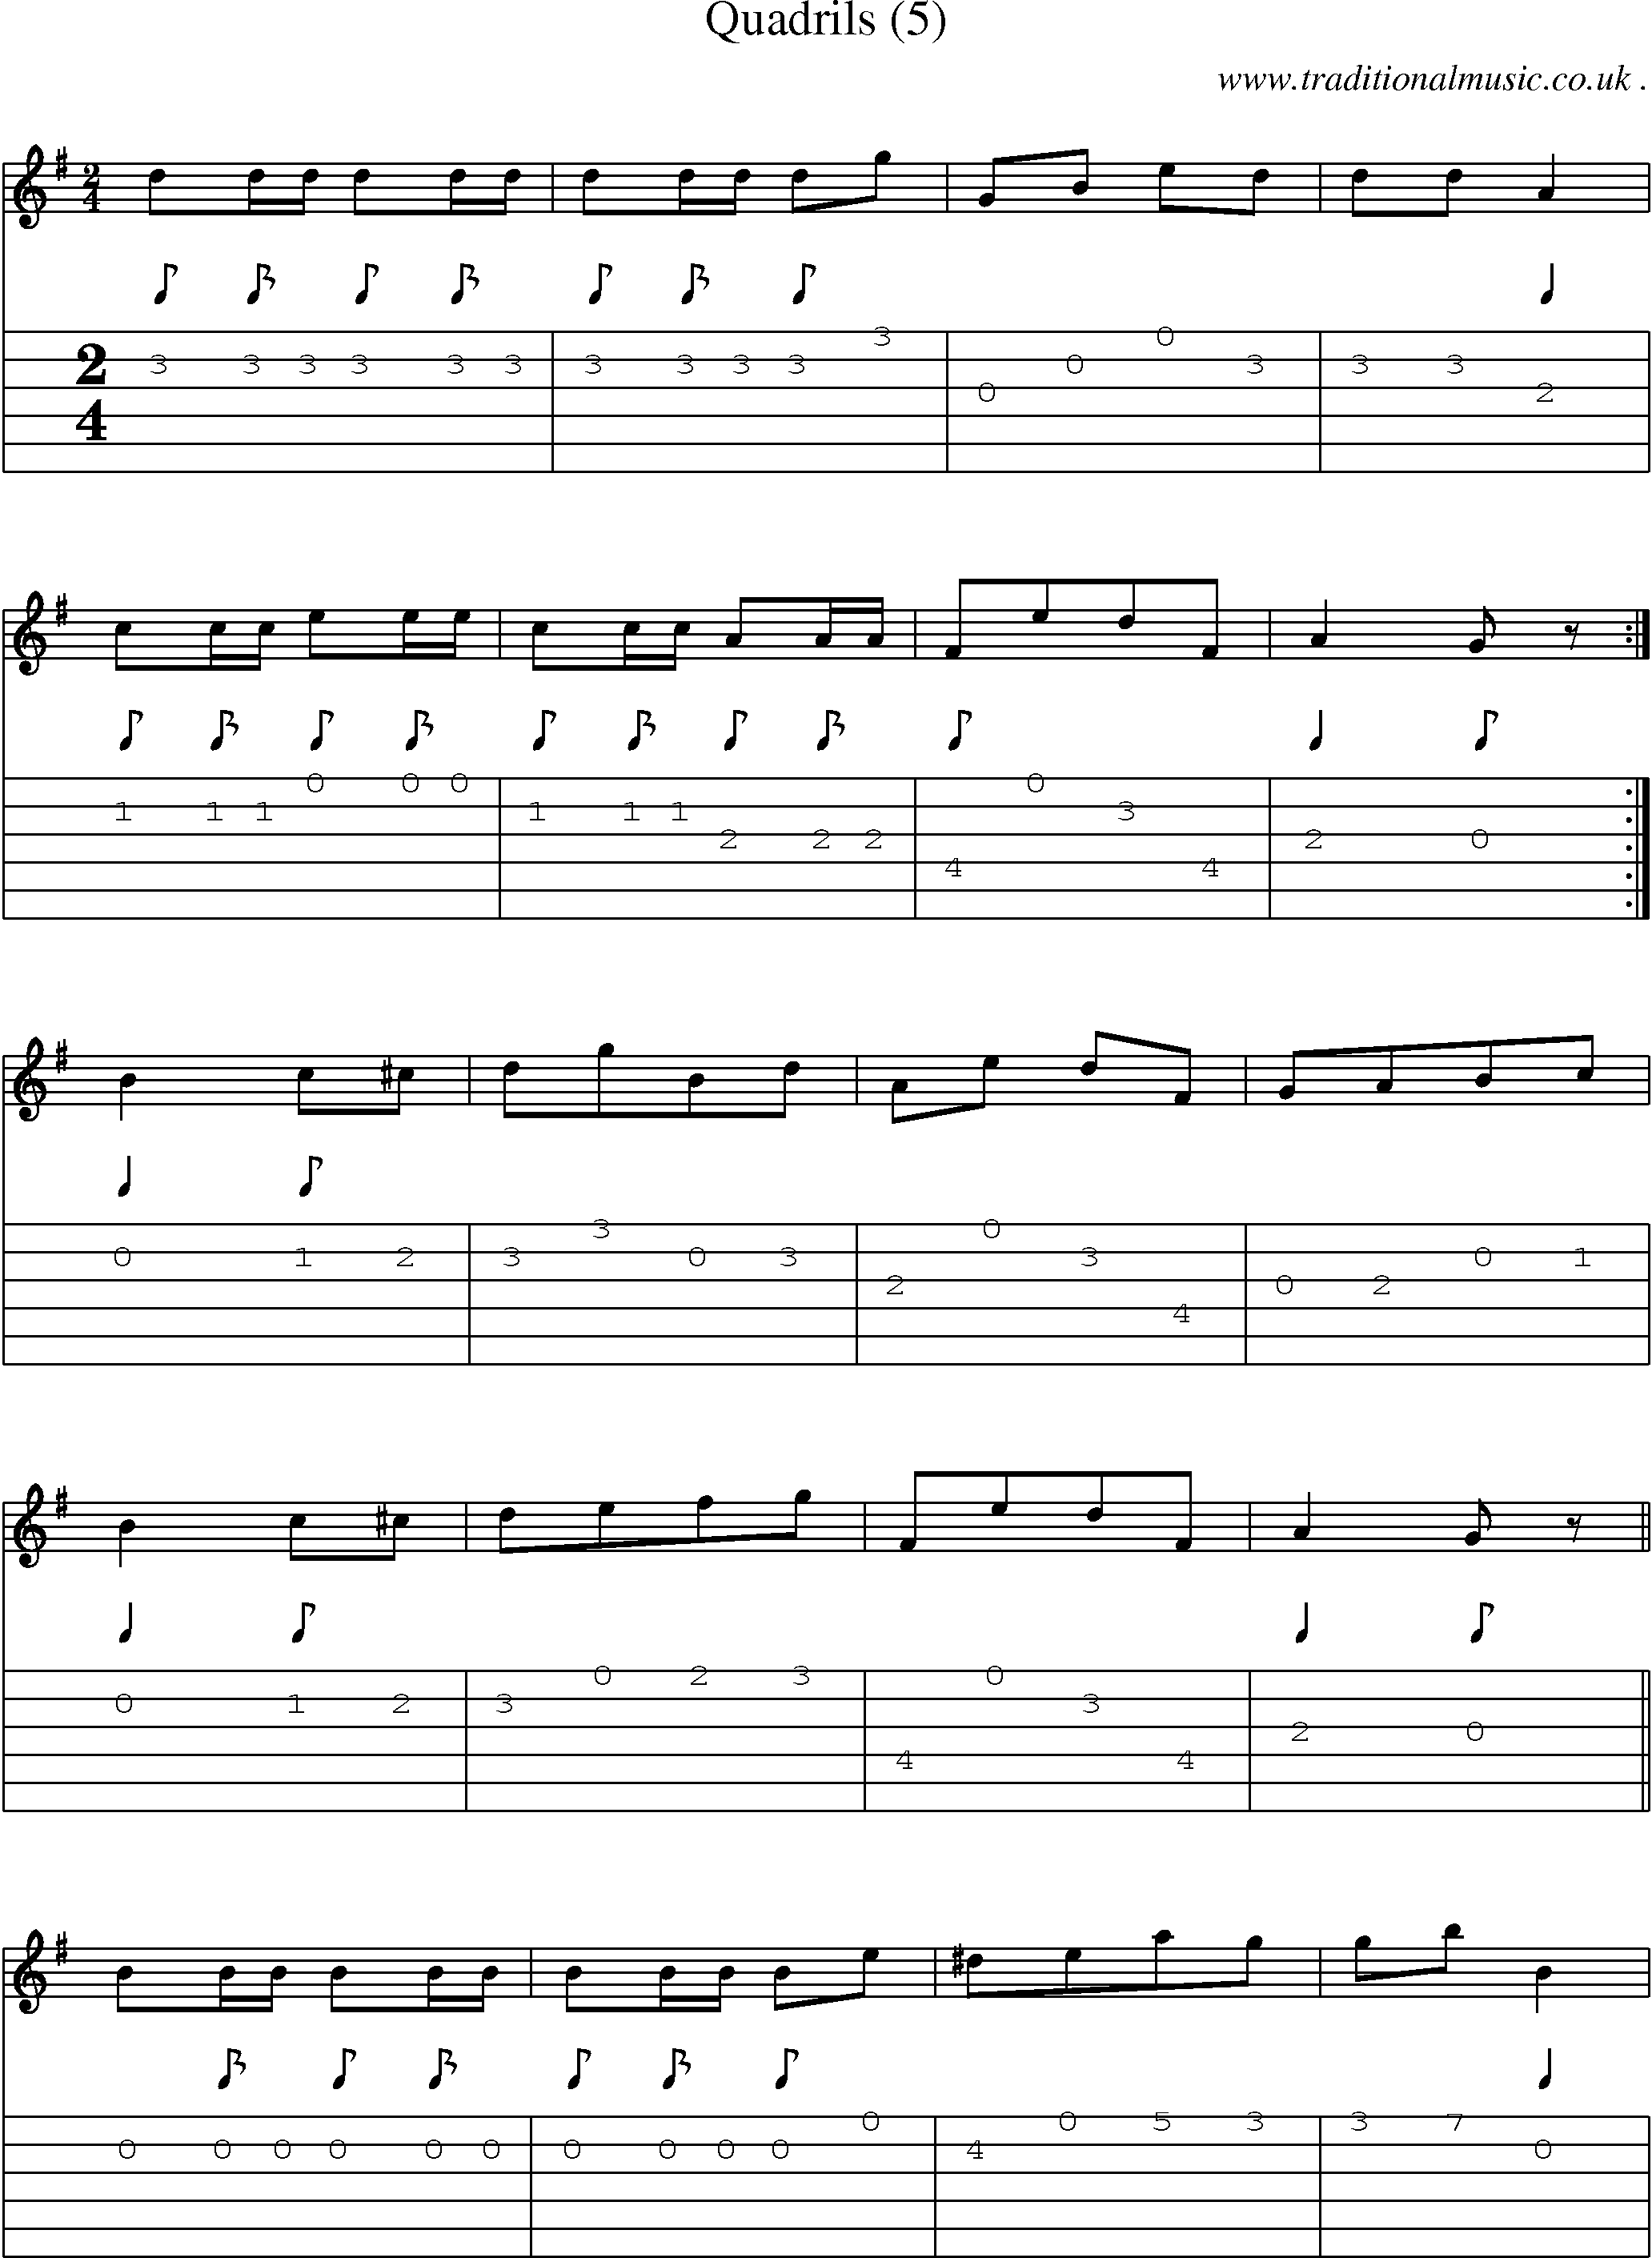 Sheet-Music and Guitar Tabs for Quadrils (5)